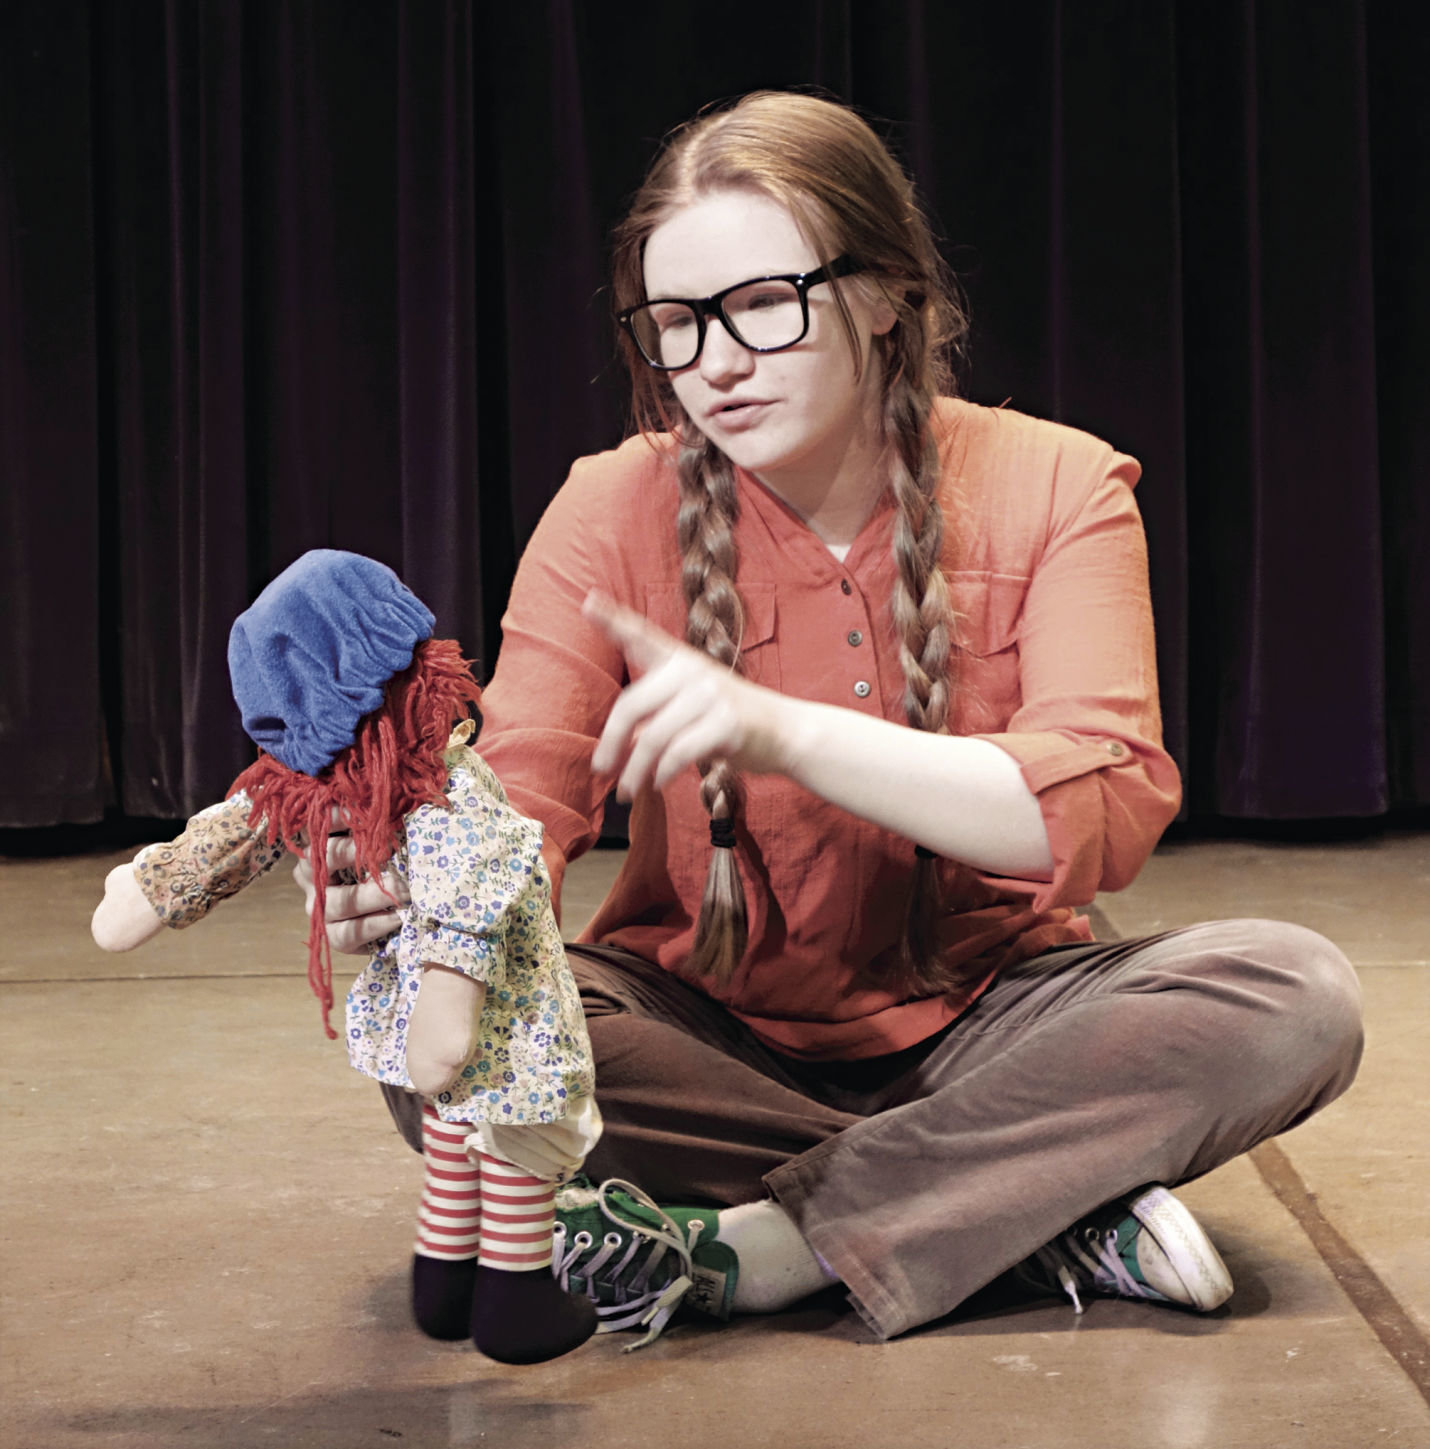 Meg Murry (Sophia Breithaupt) begins her adventures in “A Wrinkle in Time” as a misunderstood girl. Presented by OCEAN, Port Townsend School District’s alternative learning program, the play opens this weekend. Photo courtesy Michael Gessinger